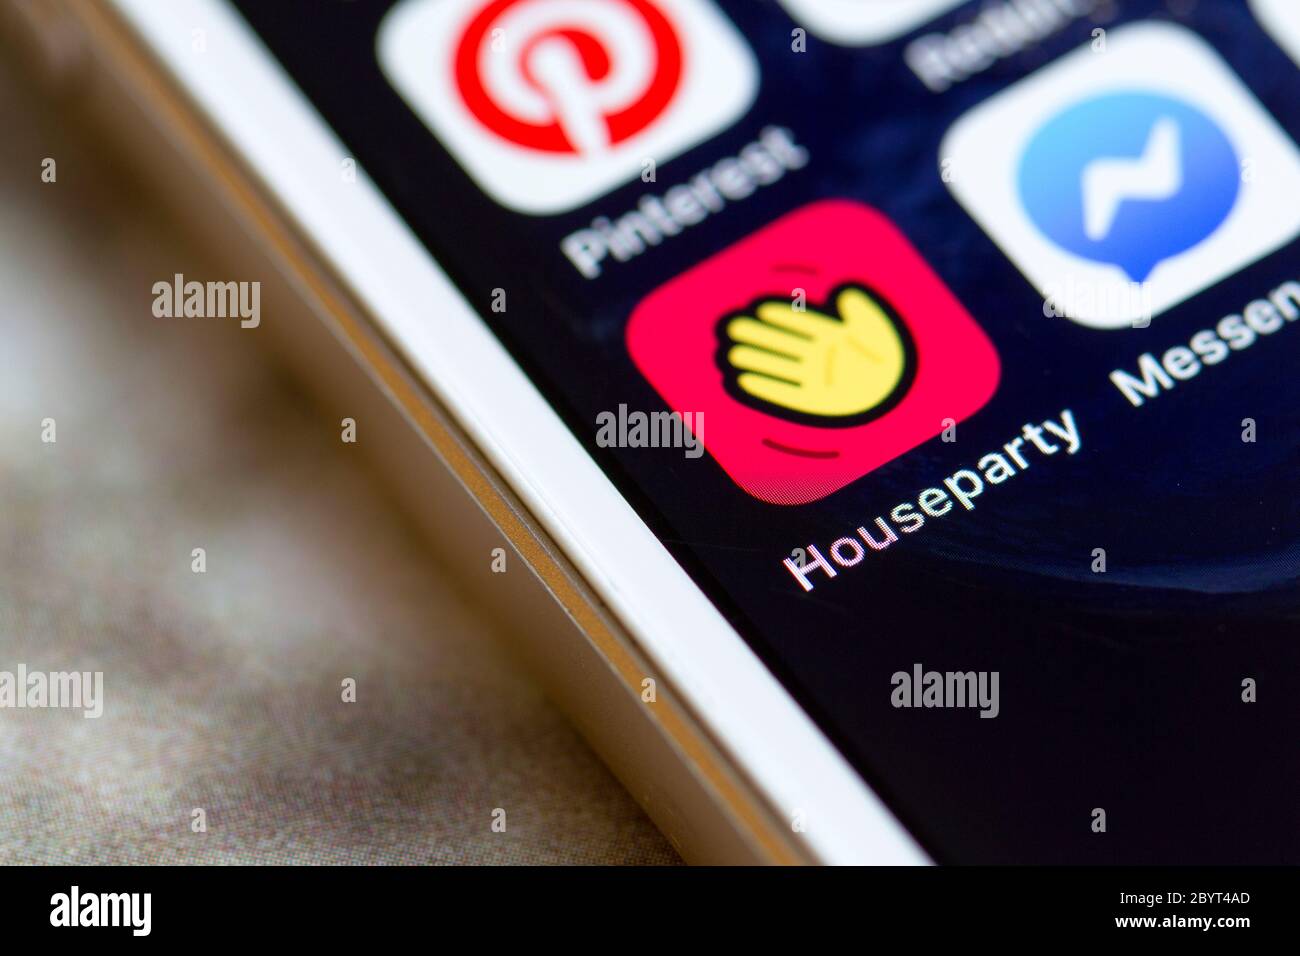 Houseparty mobile app icon is seen on a smartphone. Houseparty is a social networking service that enables group video chatting. Stock Photo